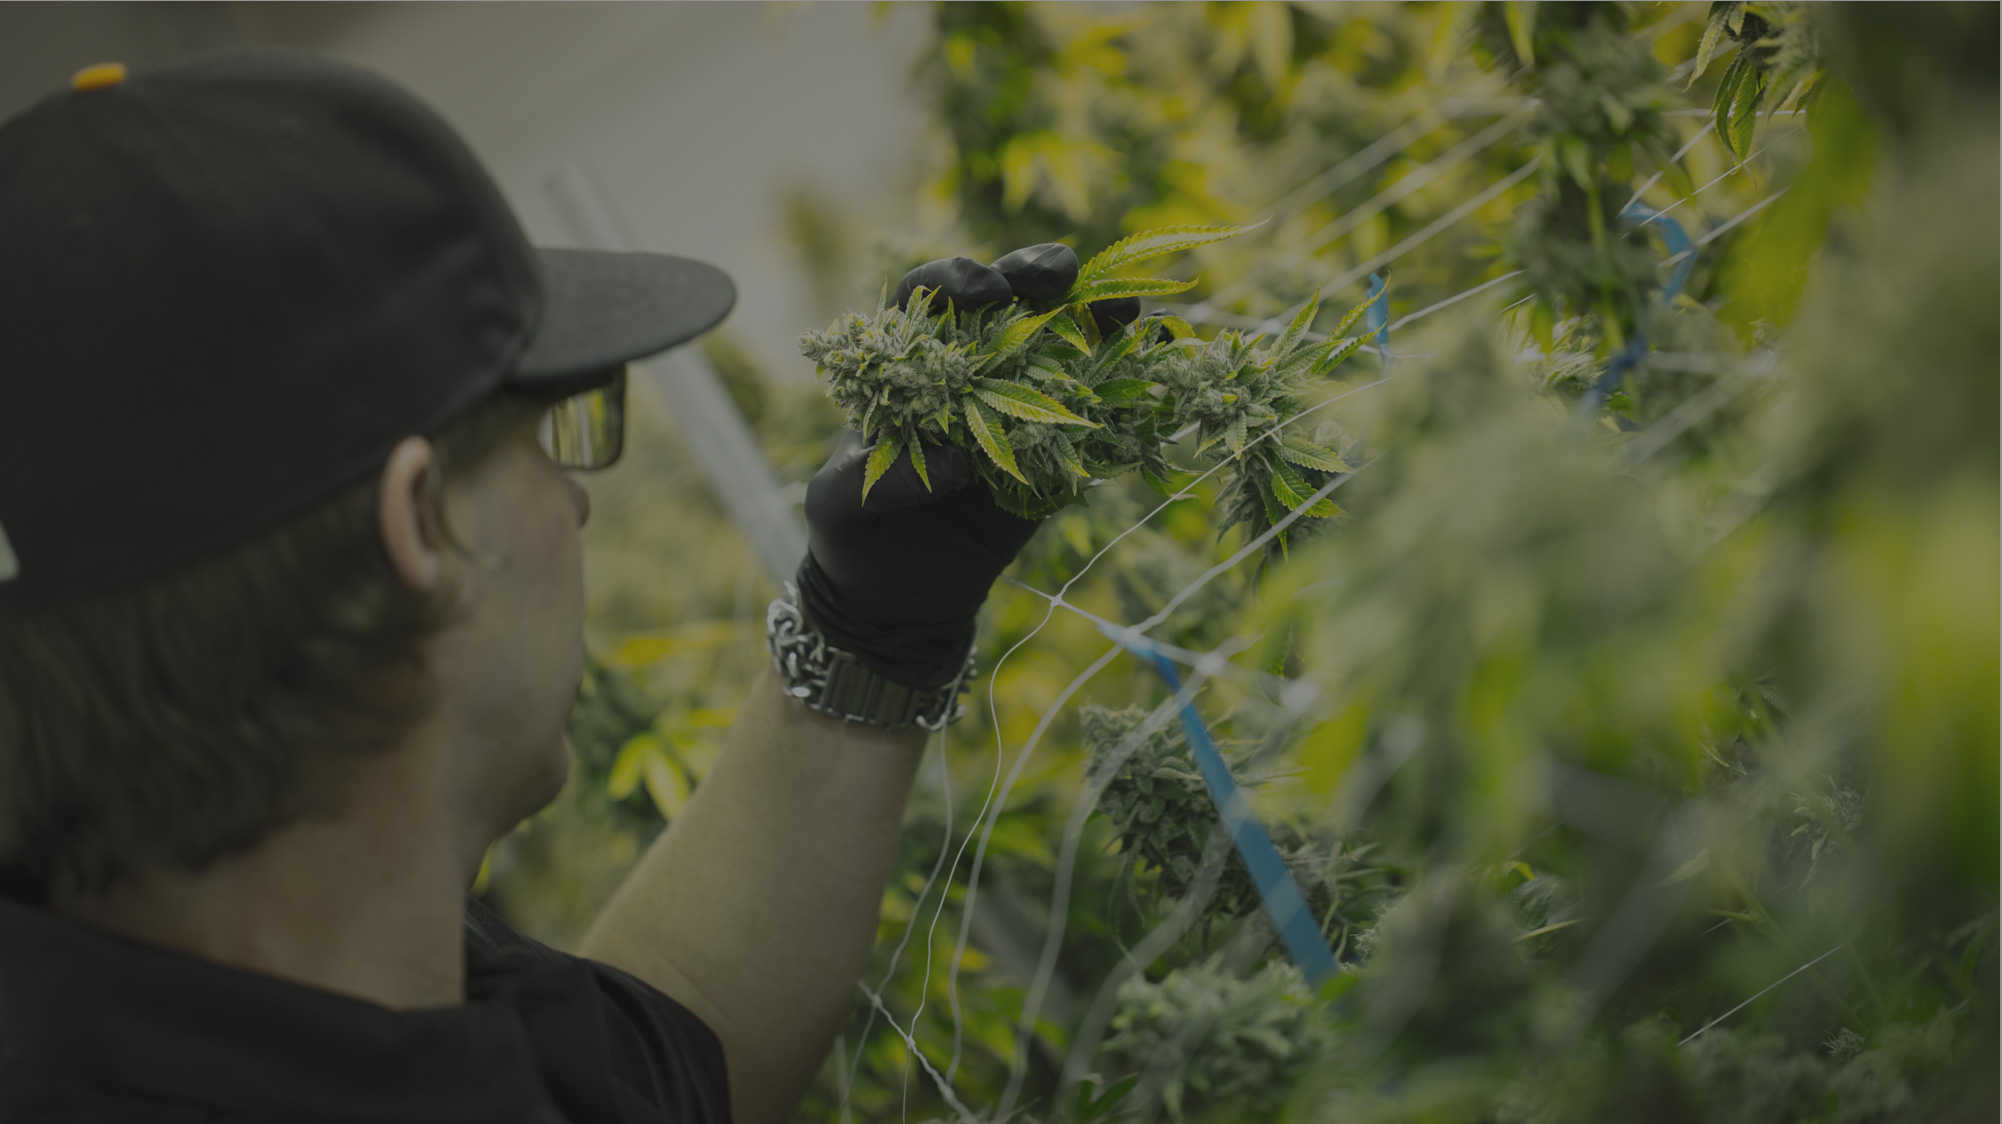 Mr. Natural - Cultivation Inspection of Cannabis Plants in Grow Facility